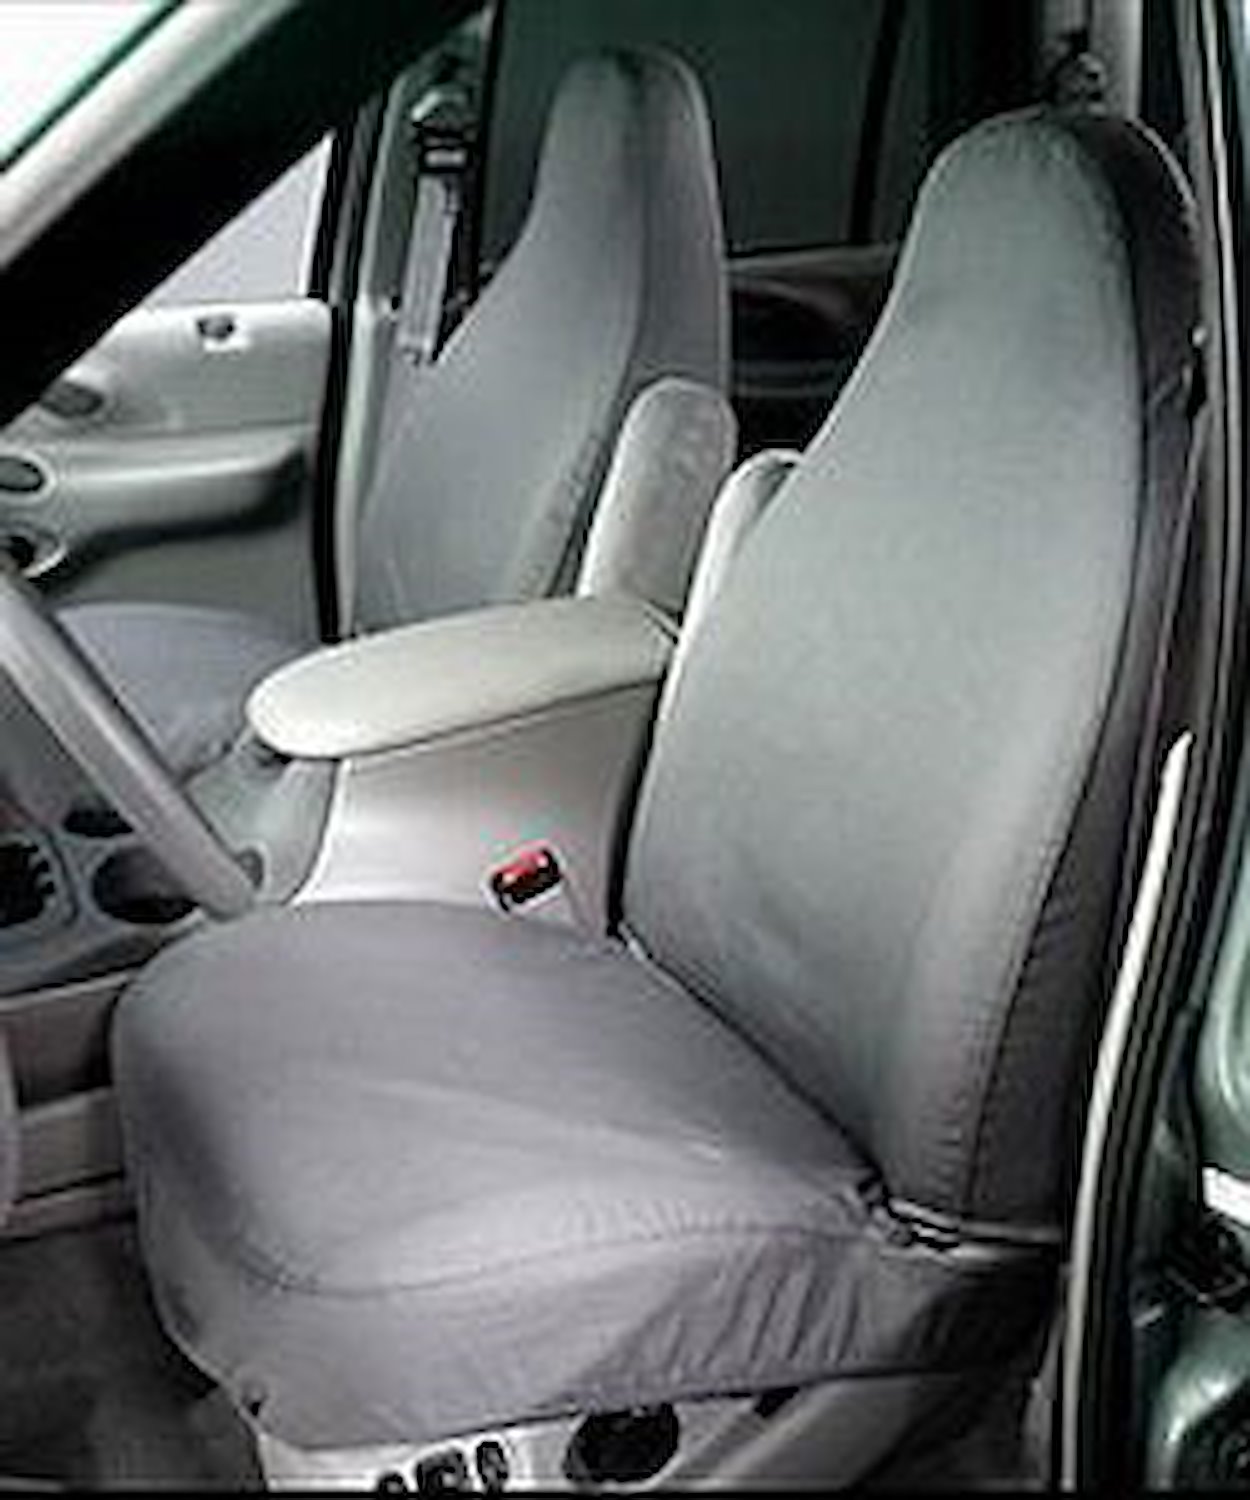 SeatSaver Custom Seat Cover Polycotton Misty Gray w/40/20/40 High Back Bench Seats w/Covered Fold Down Console